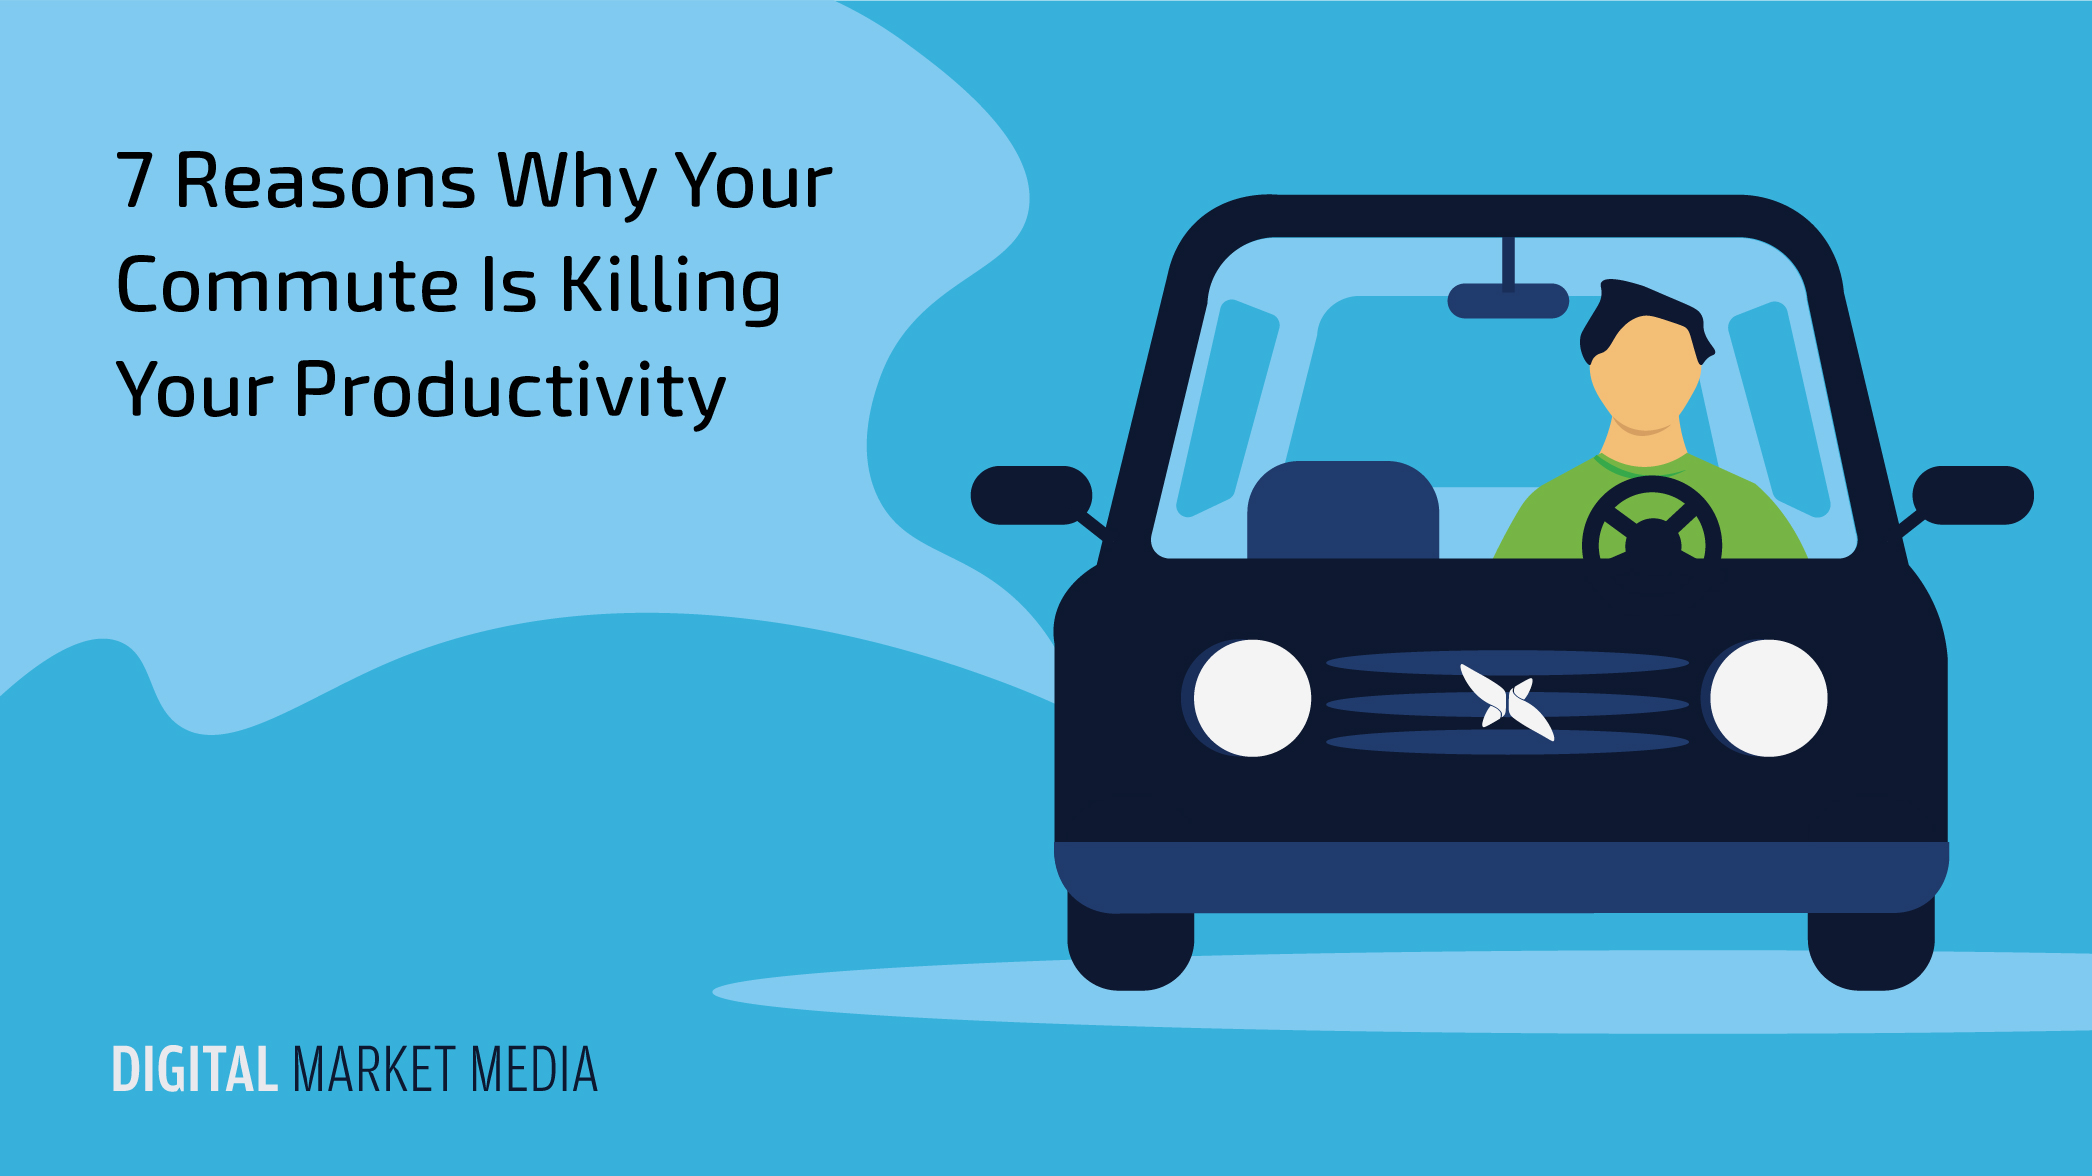 7 Reasons Why Your Commute Is Killing Your Productivity